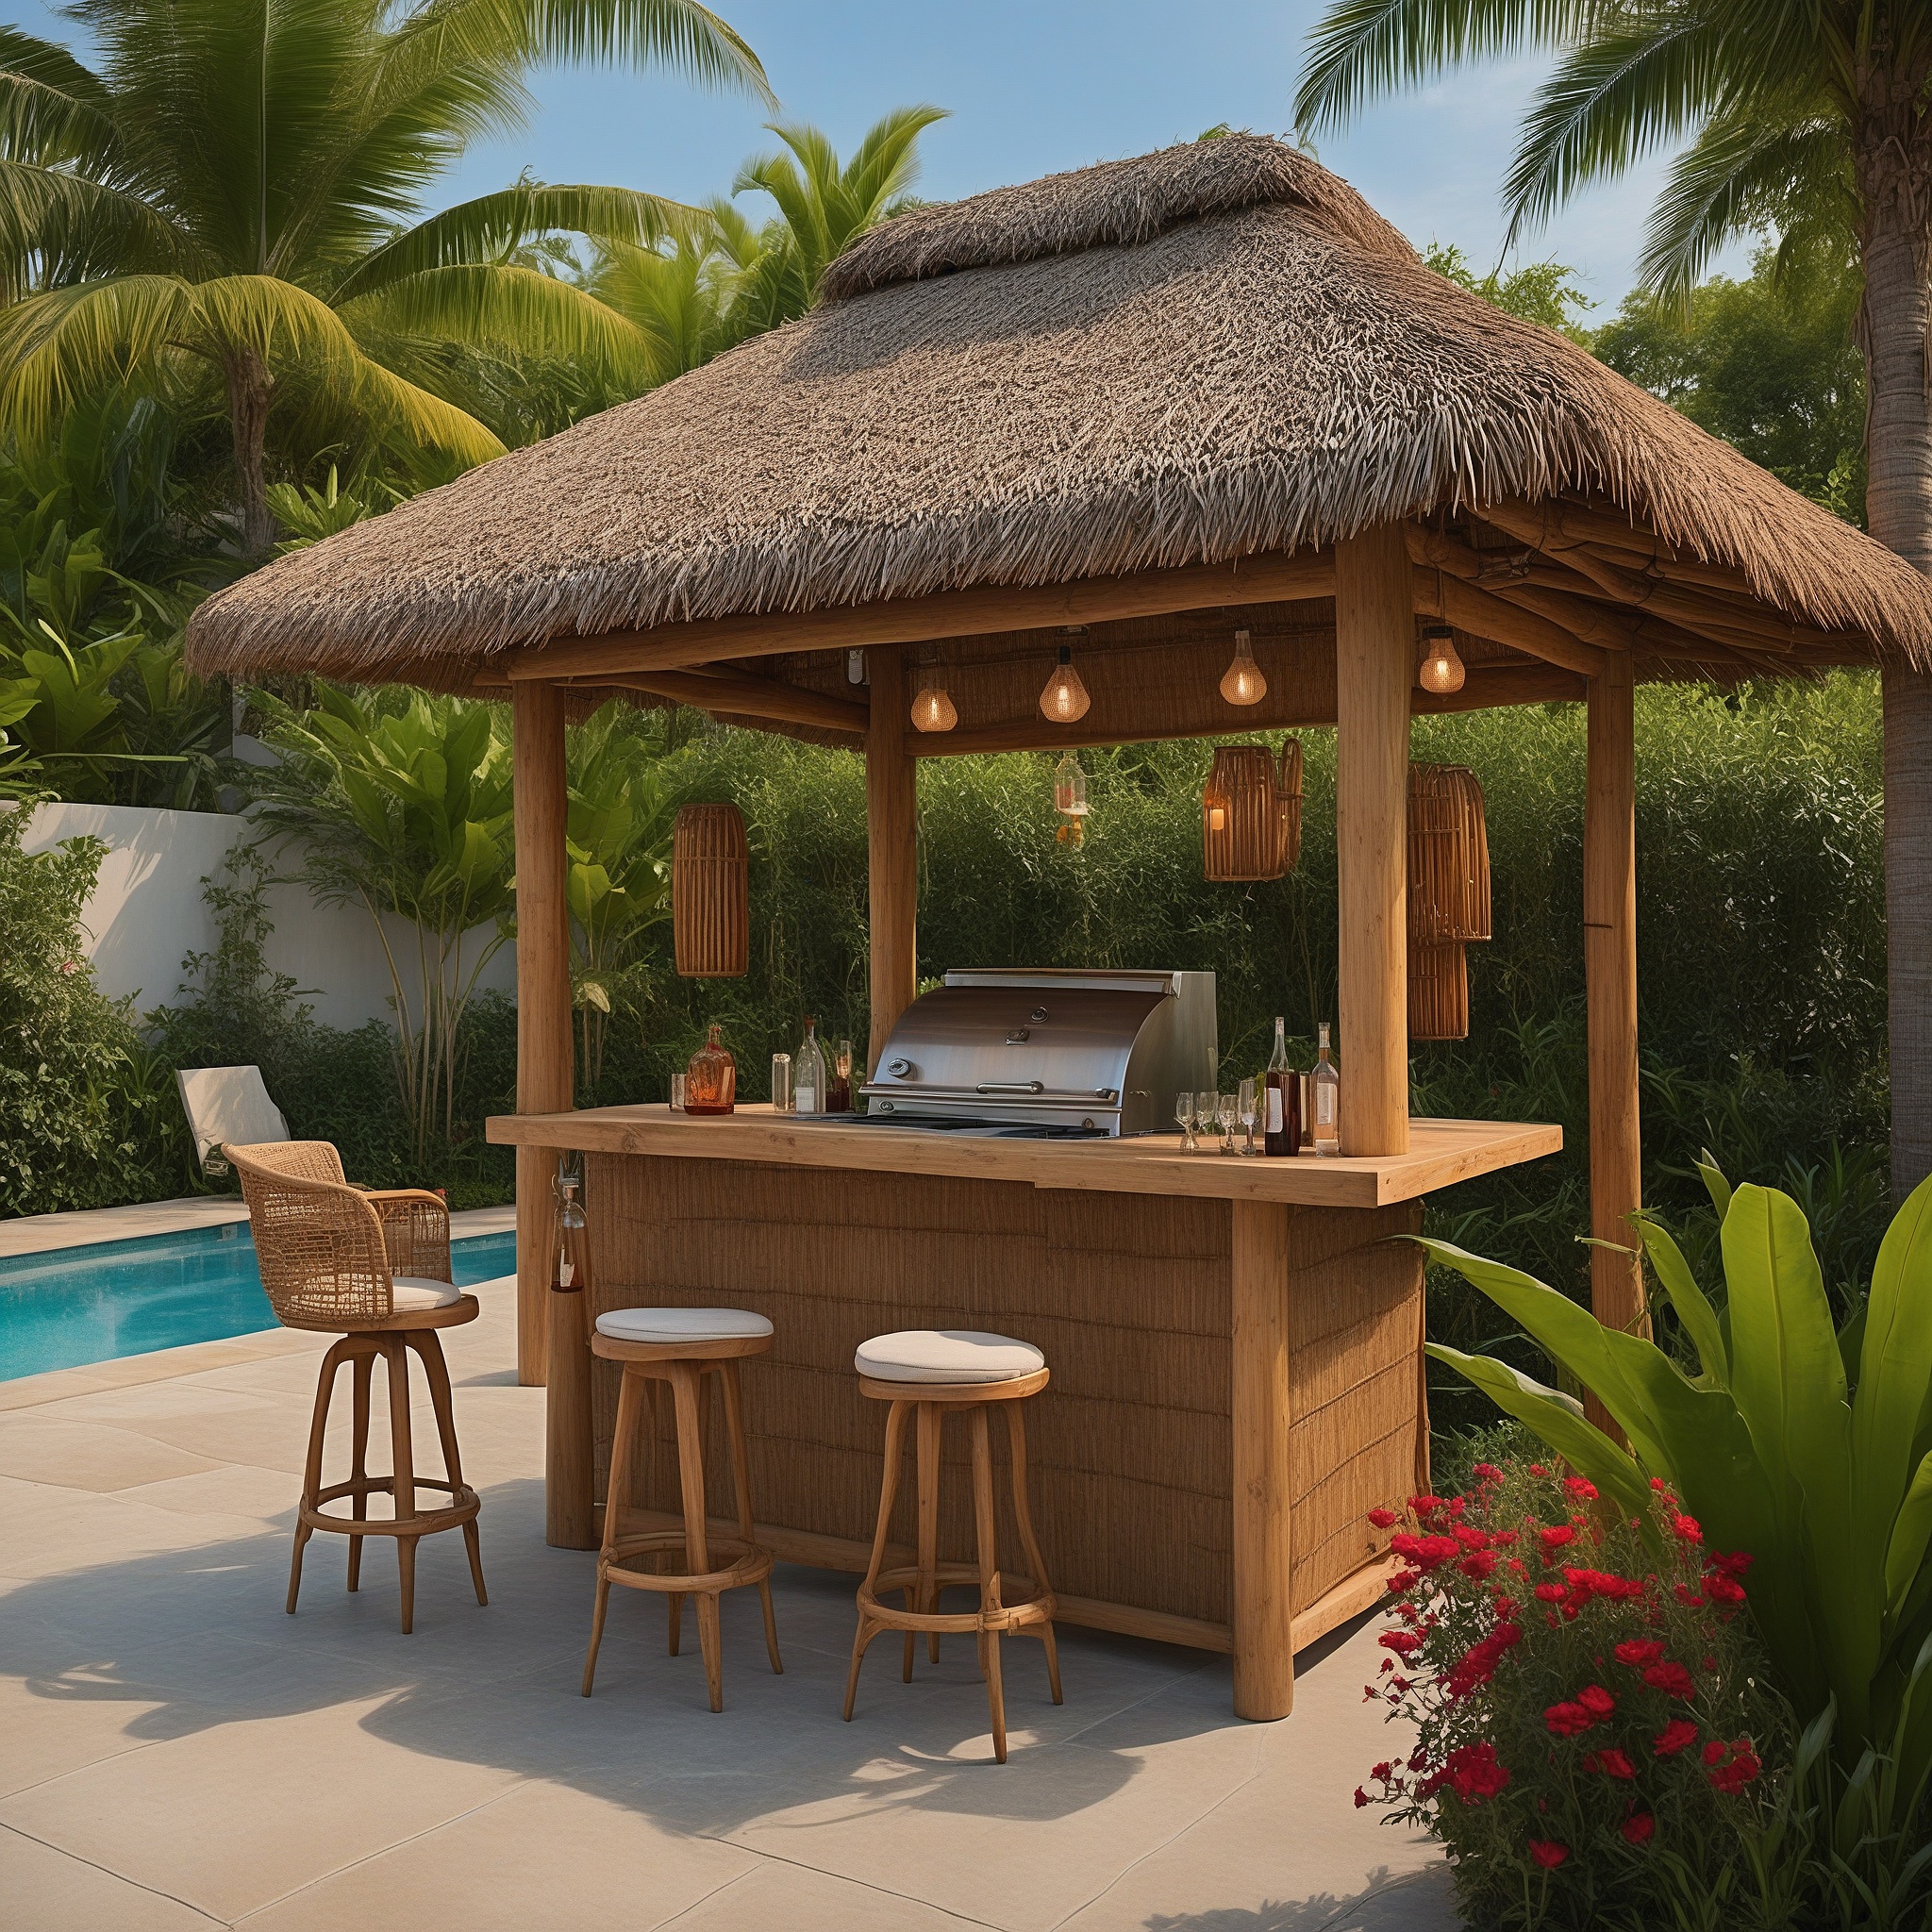 Bamboo Bar And Grill Setup With Thatched Roof